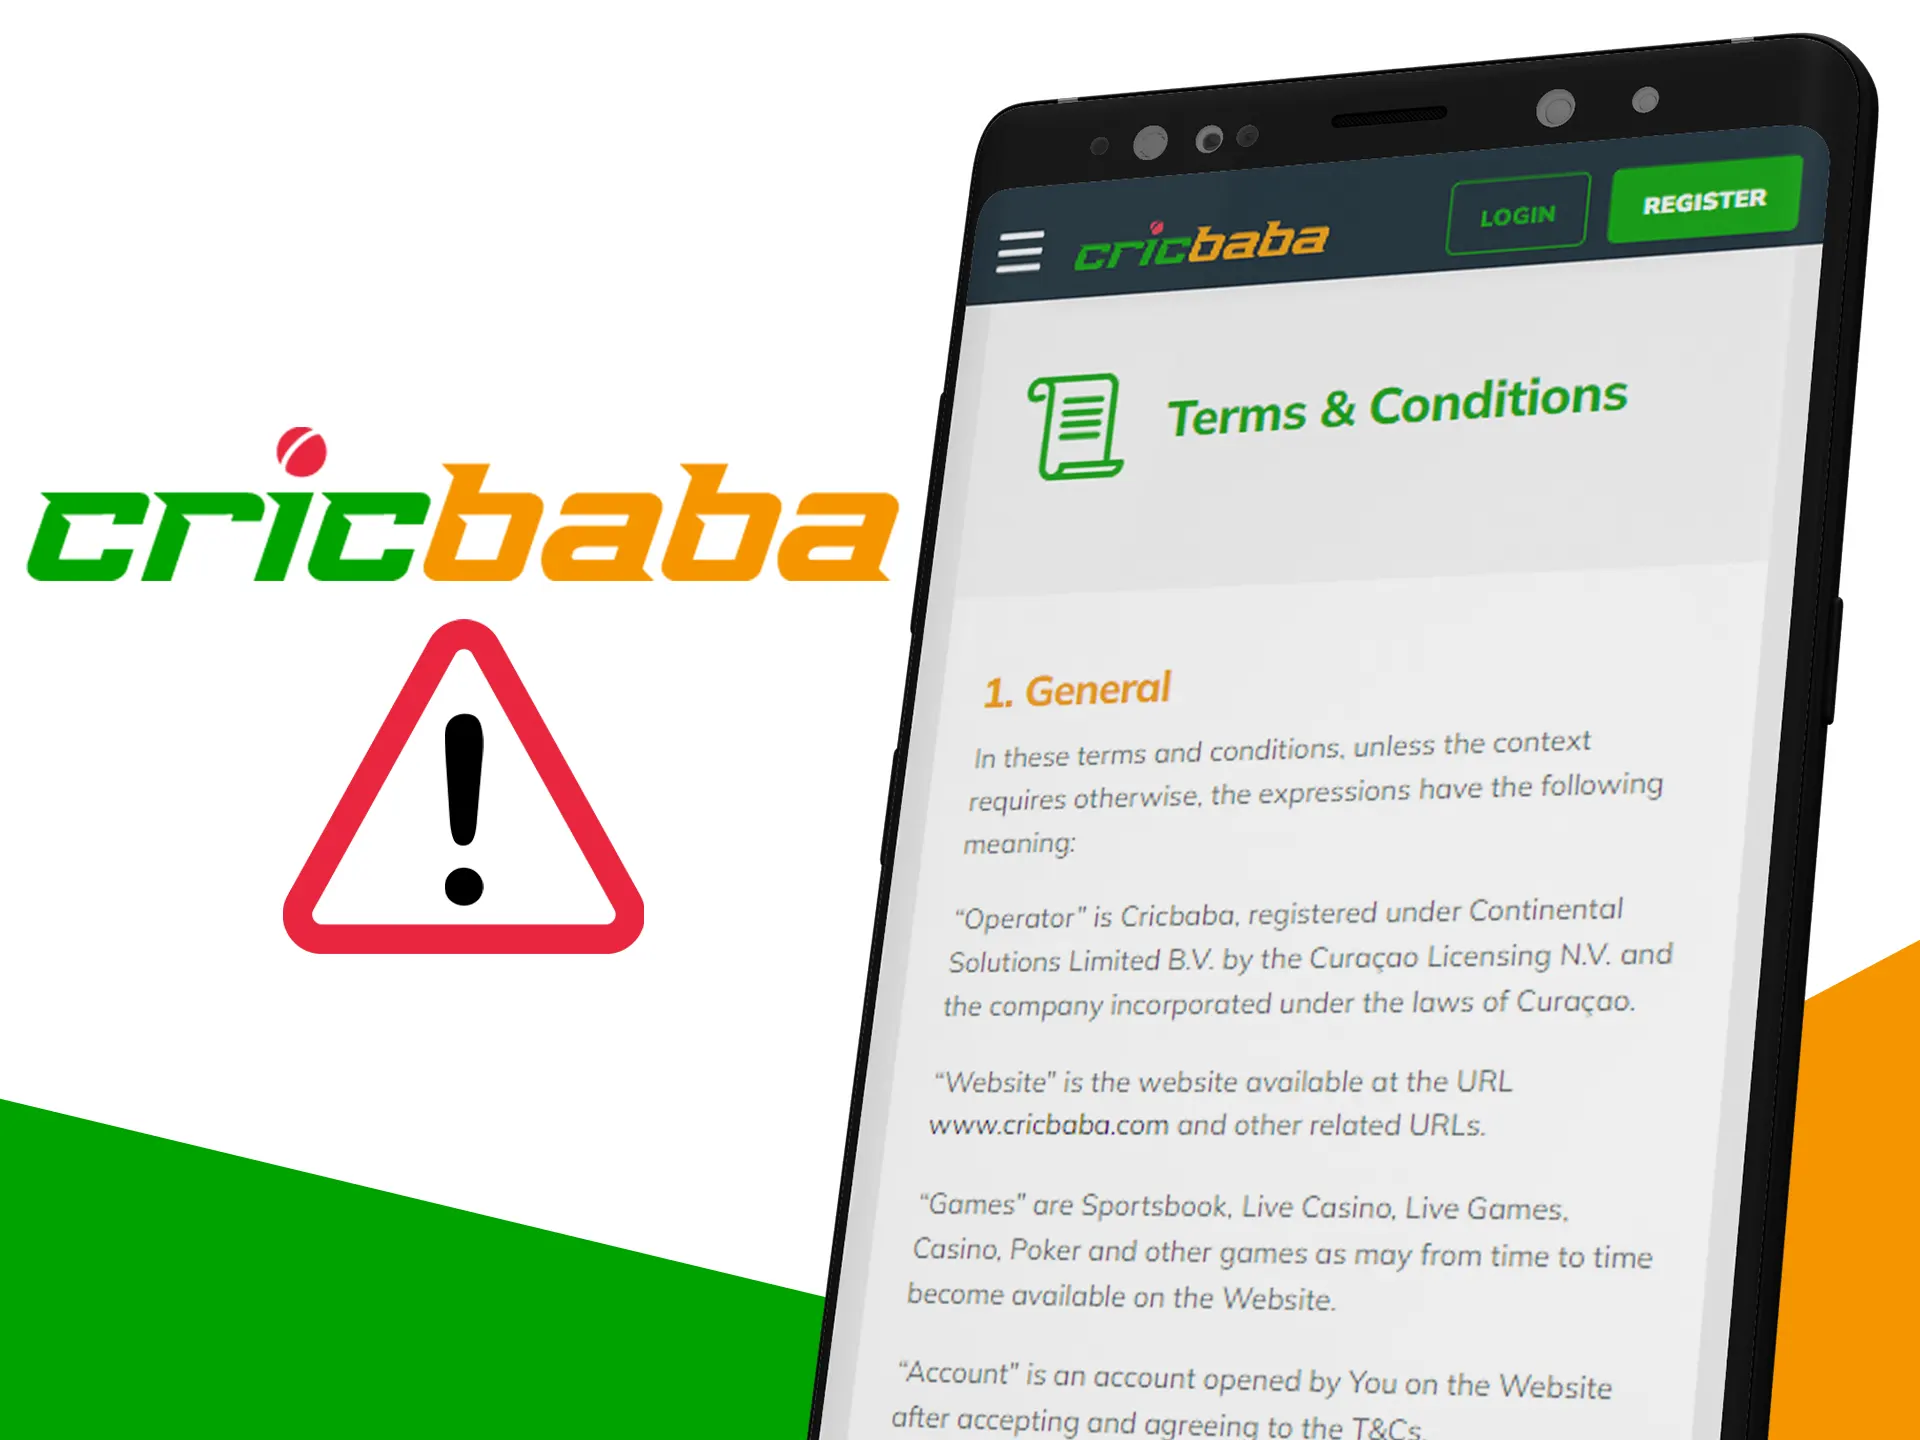 Read rules before using Cricbaba services.